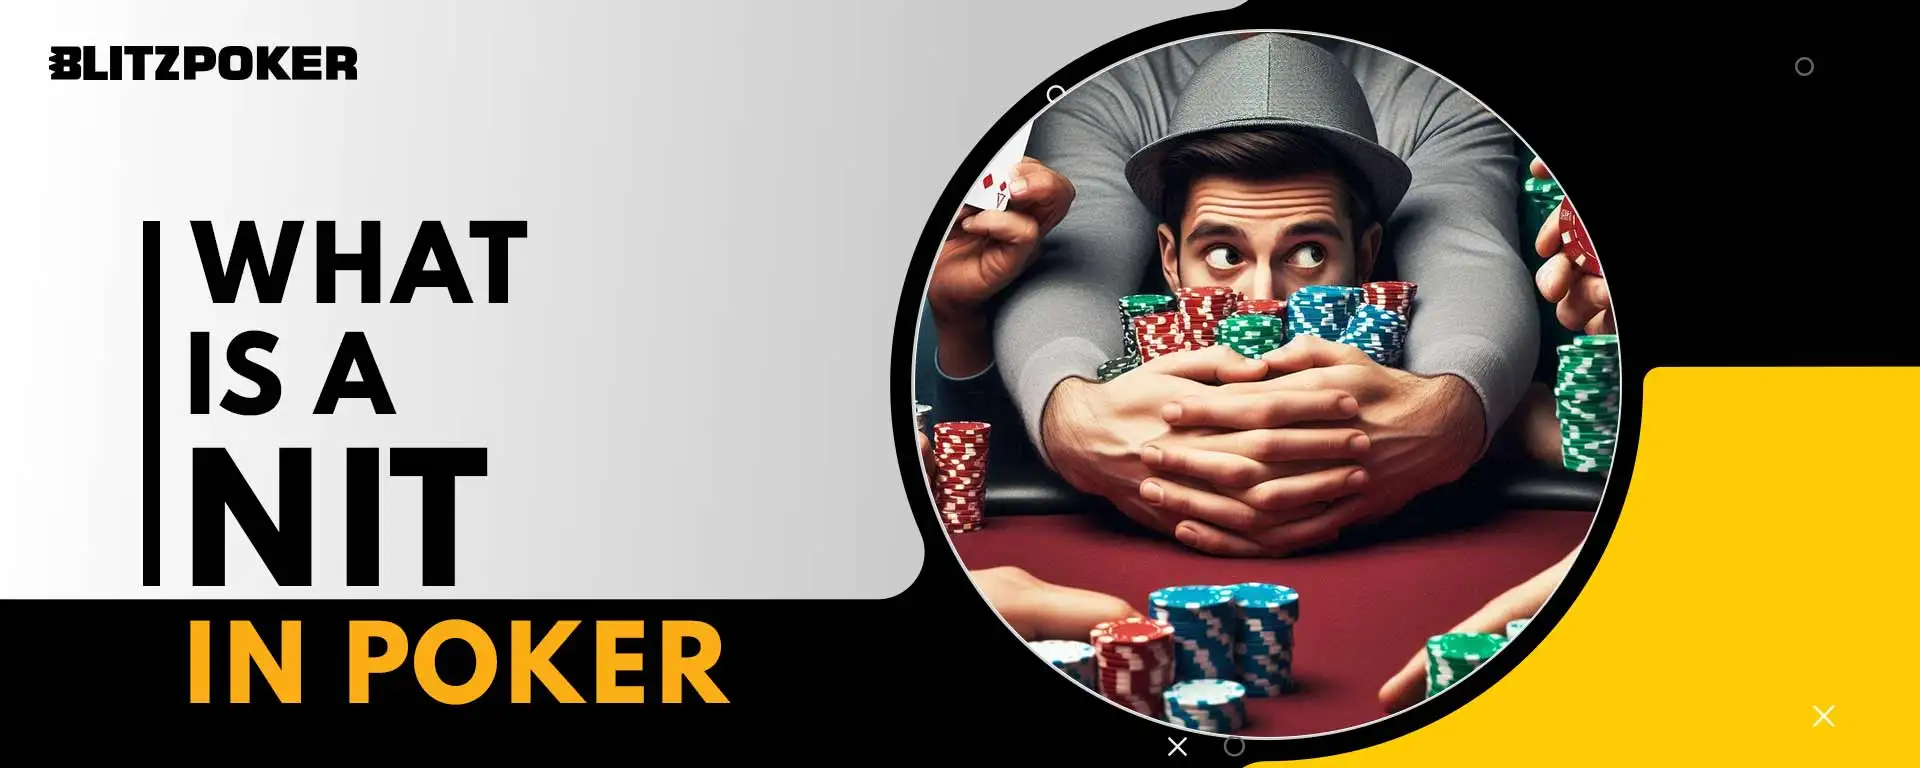 What Is a Nit in Poker – Nit Poker Term Meaning, Strategies & More